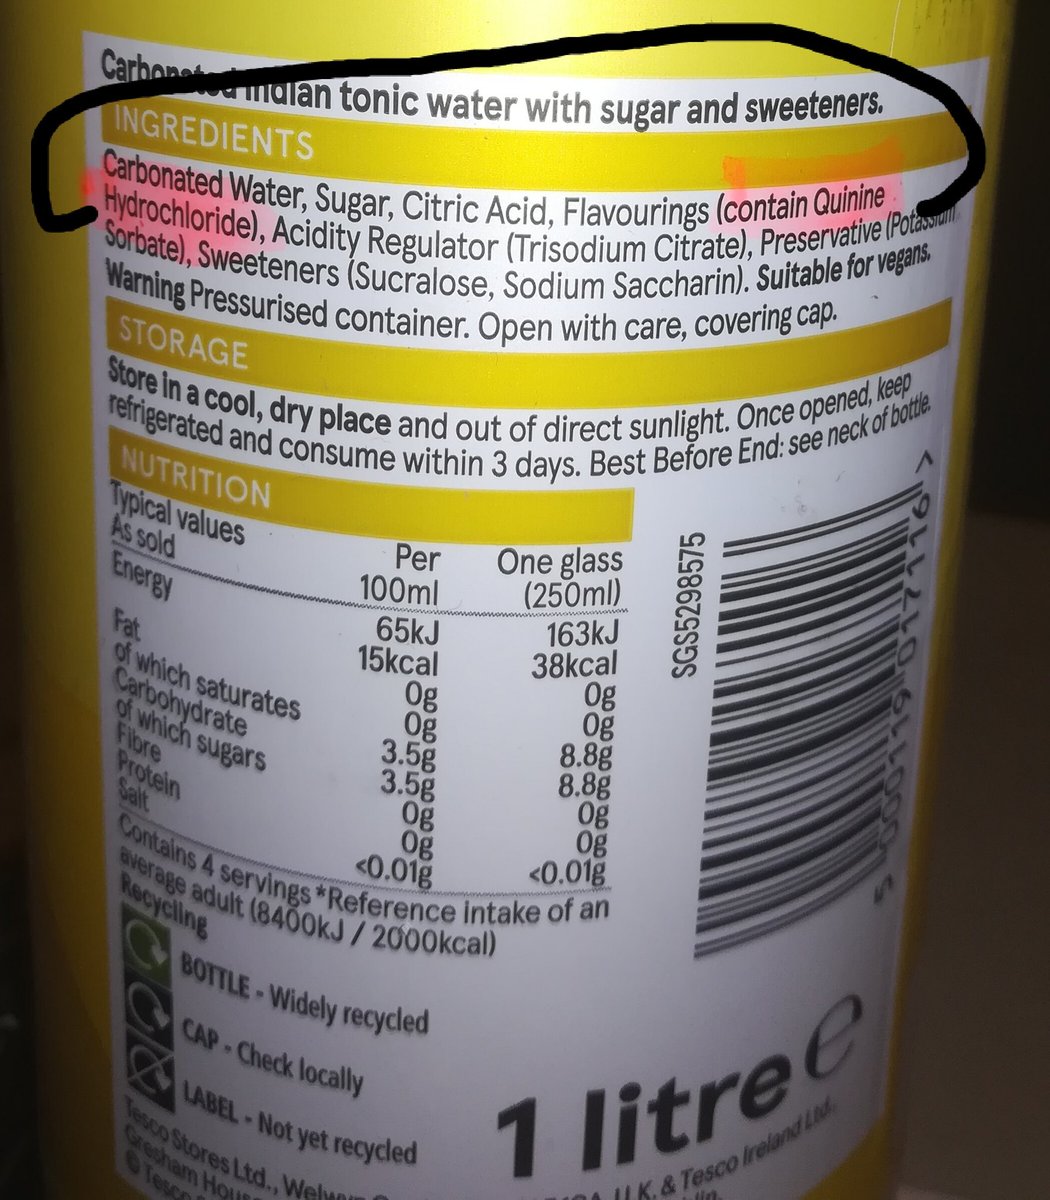 @LindaWokeUp @CllrBSilvester Isn't it the same thing in Indian tonic water, we just call it quinine hydrochloride. Lower dose but don't they both protect against malaria.